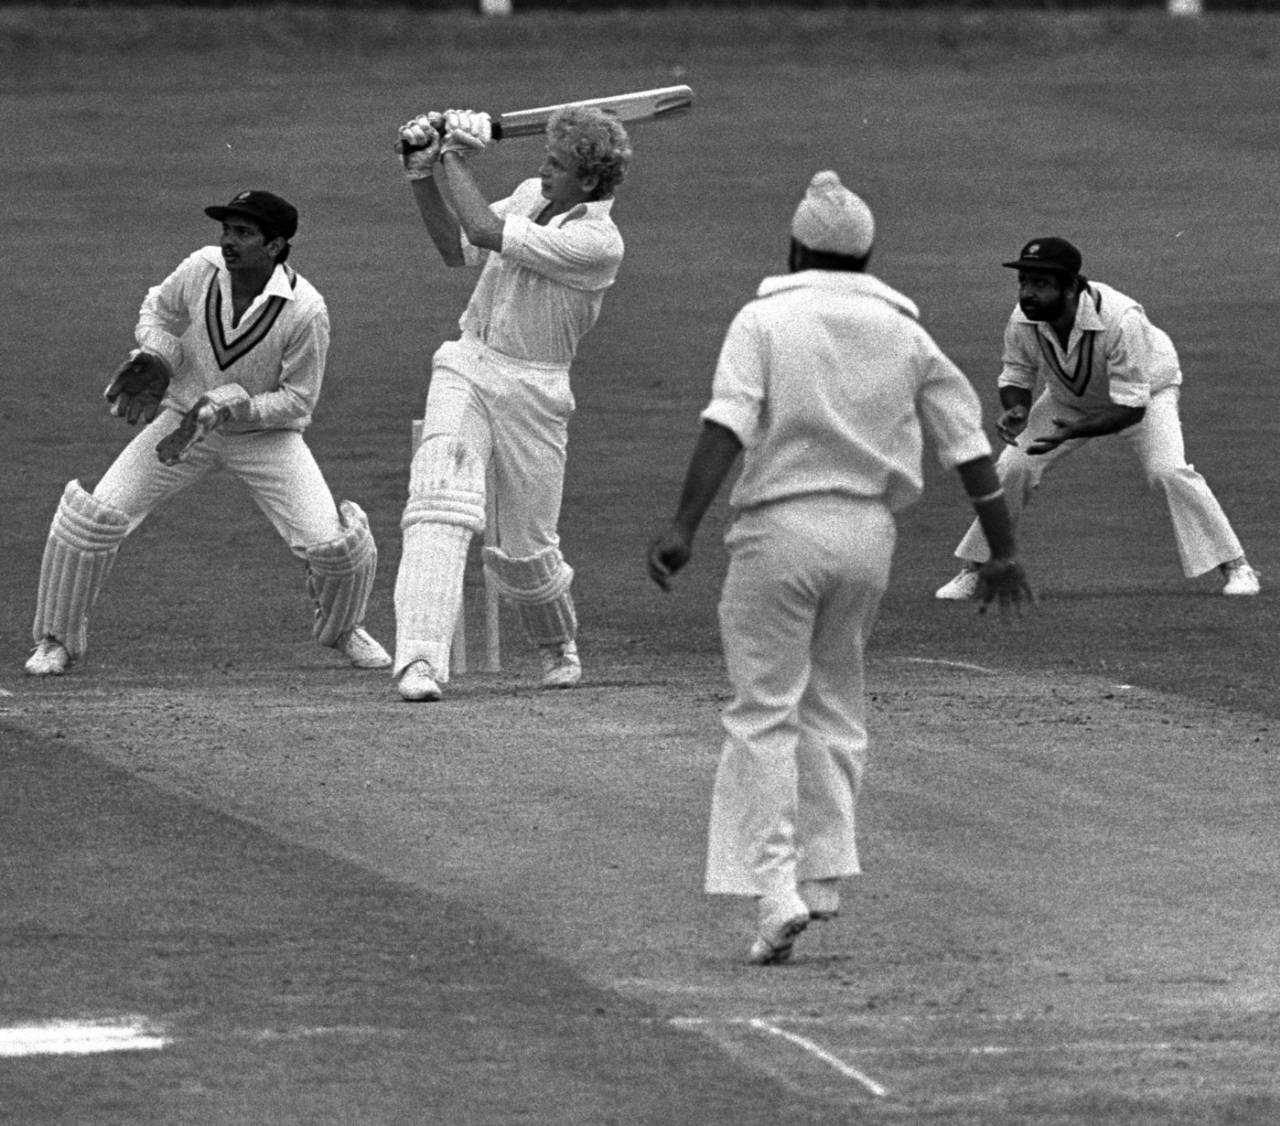 David Gower worked very hard to master his technique against spin, following initial struggles&nbsp;&nbsp;&bull;&nbsp;&nbsp;Getty Images